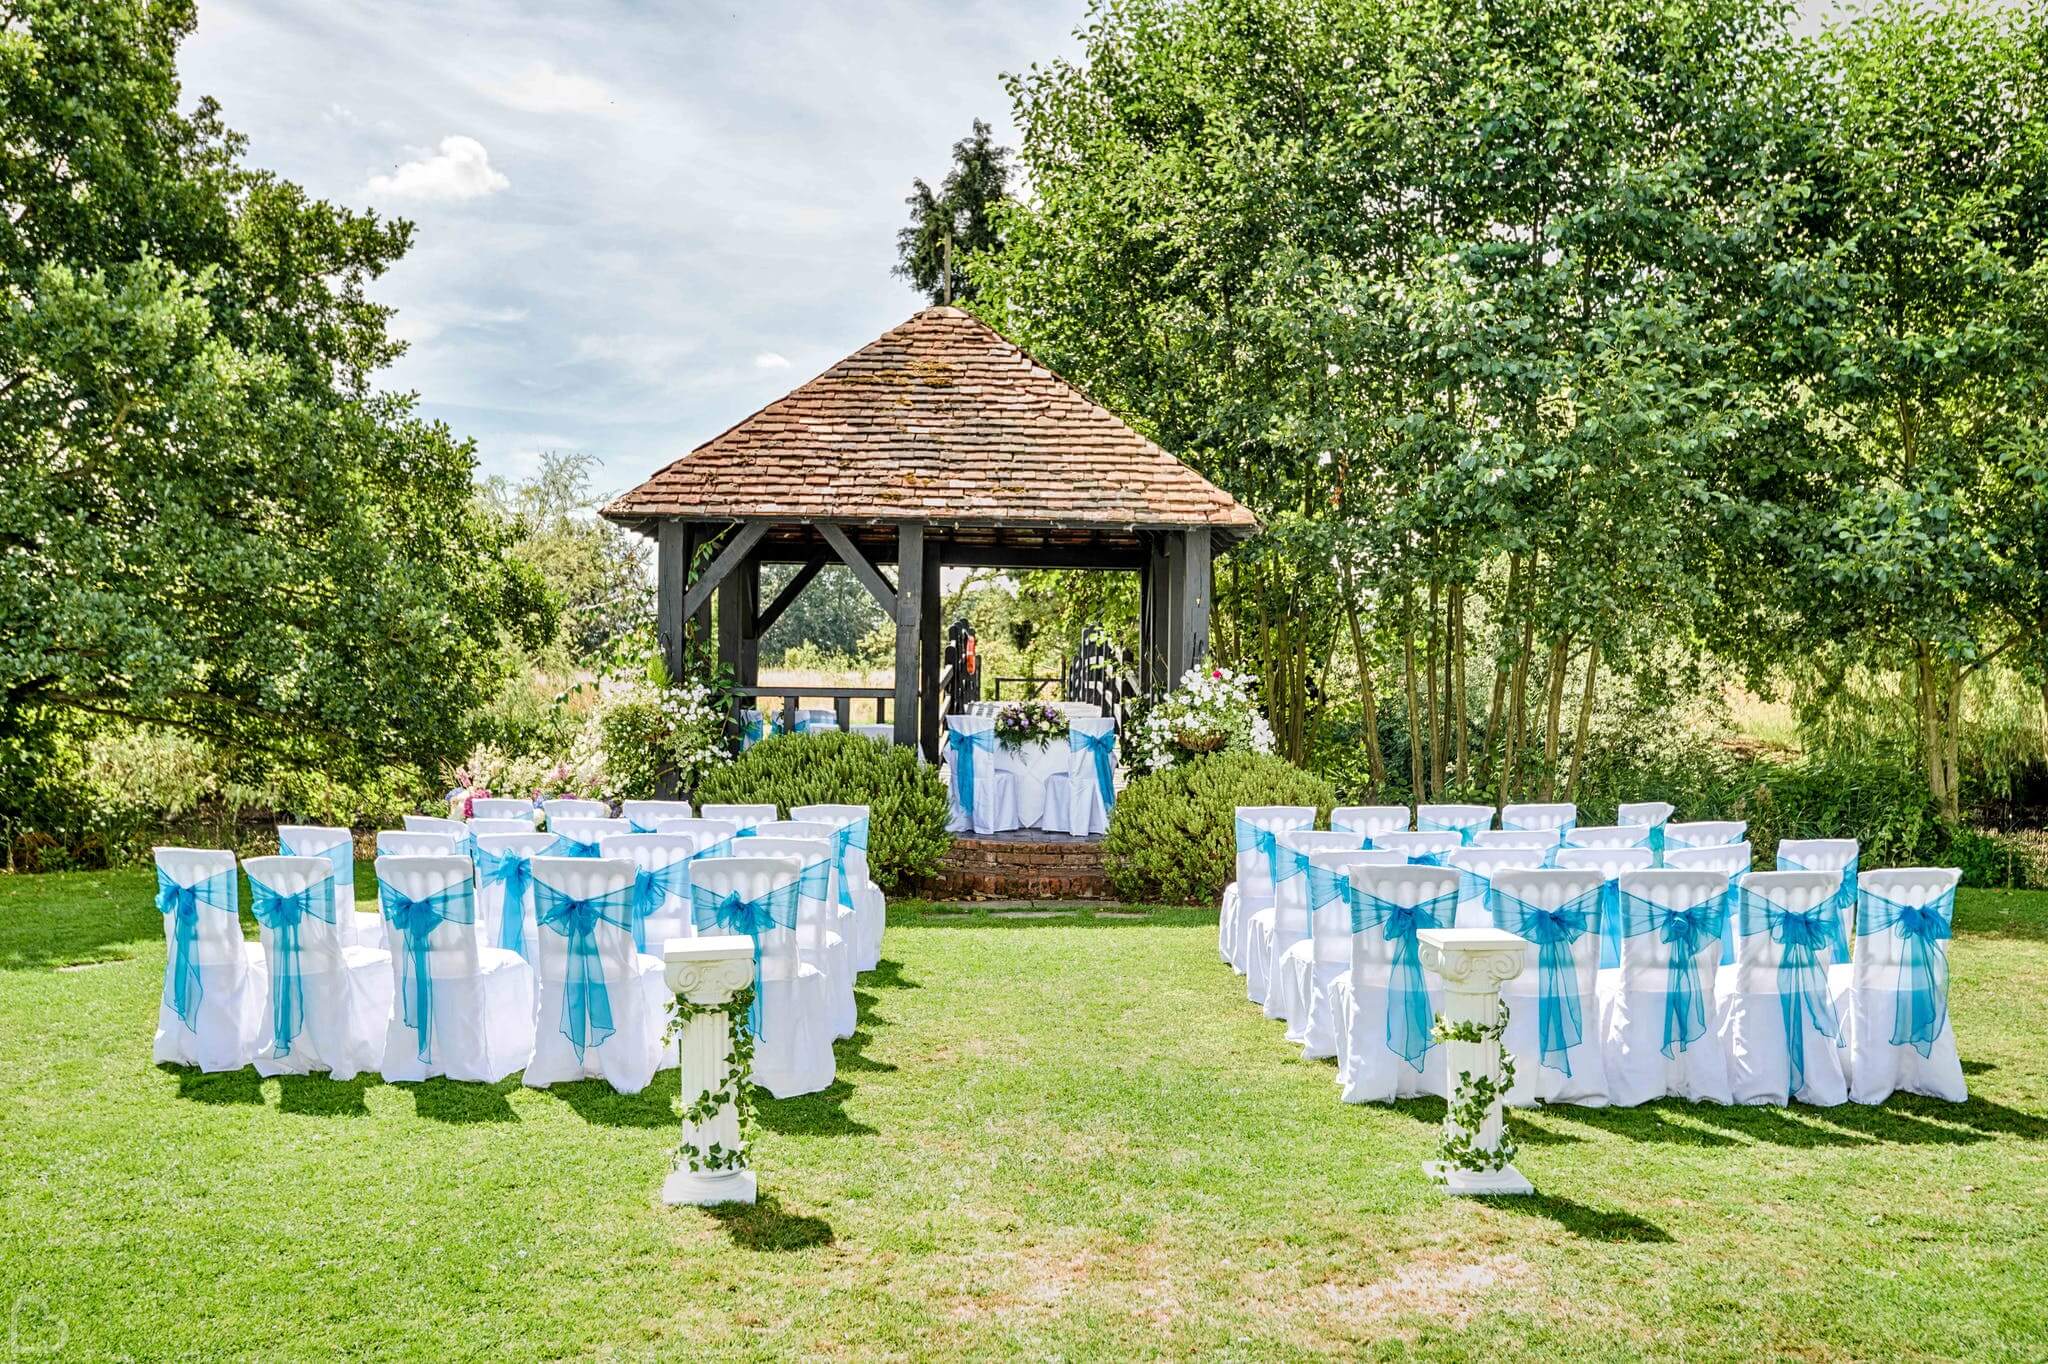  Small Wedding Venues In Essex  The ultimate guide 